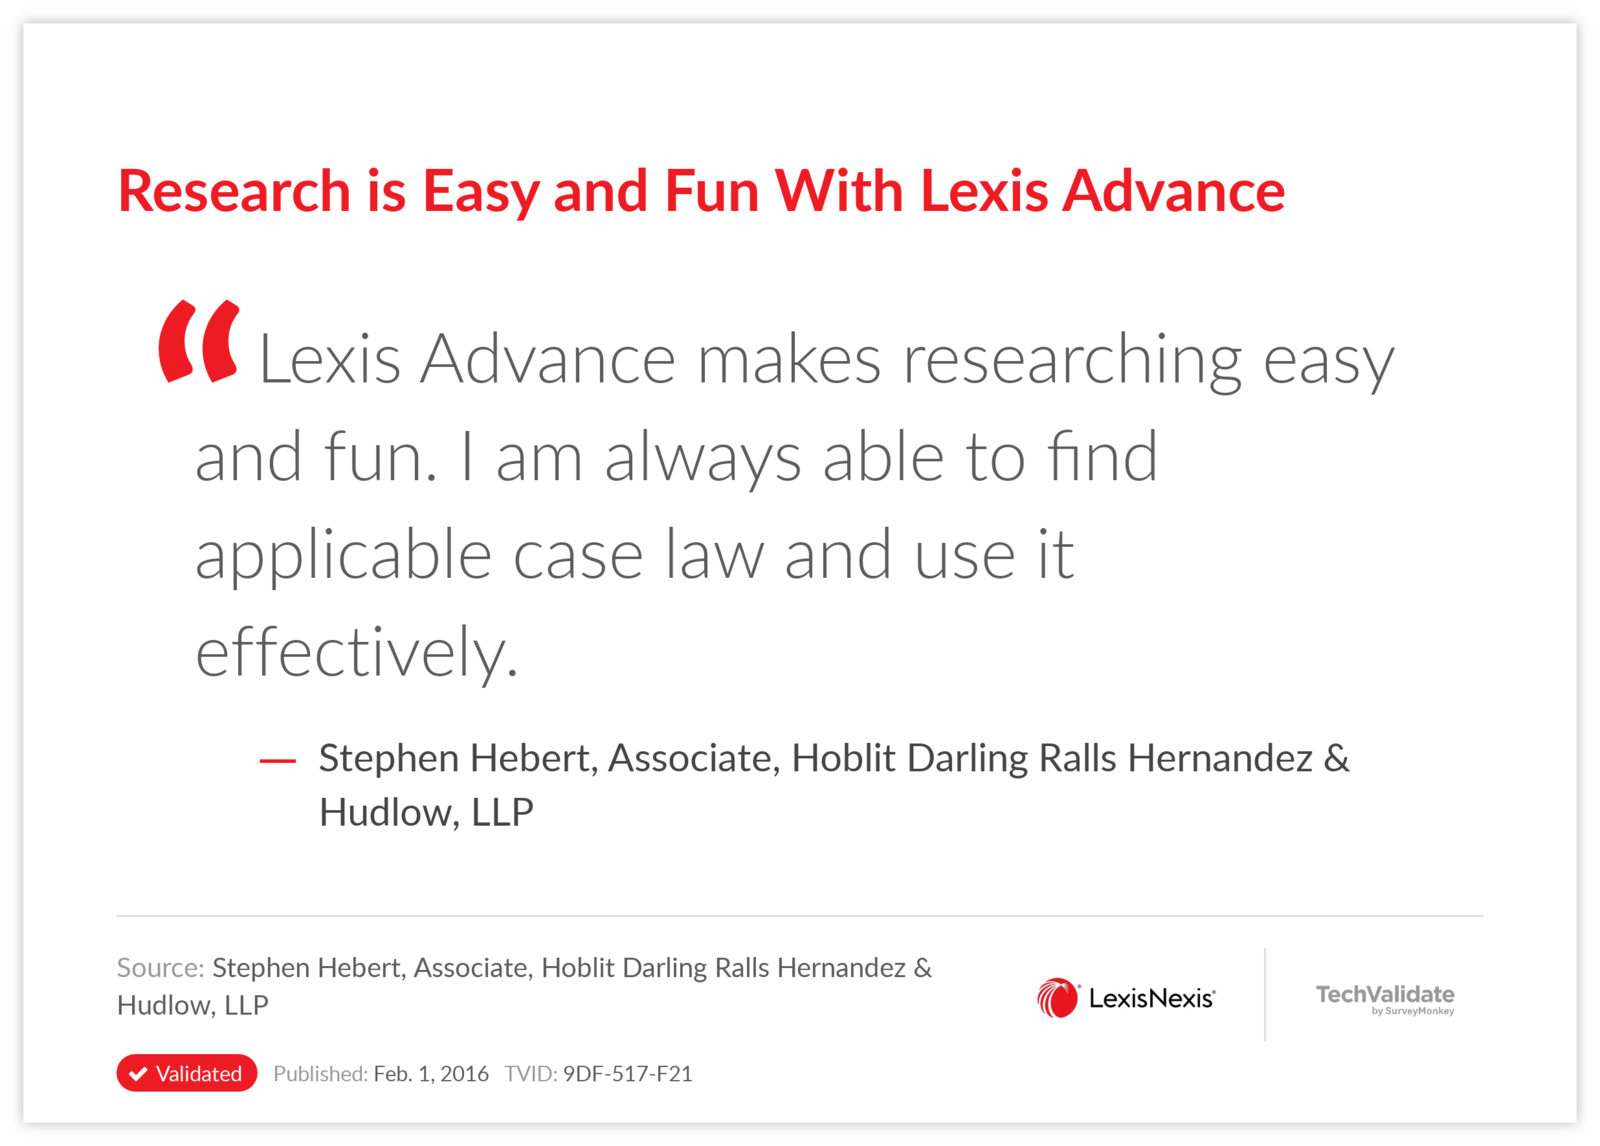 Research is Easy and Fun With Lexis Advance